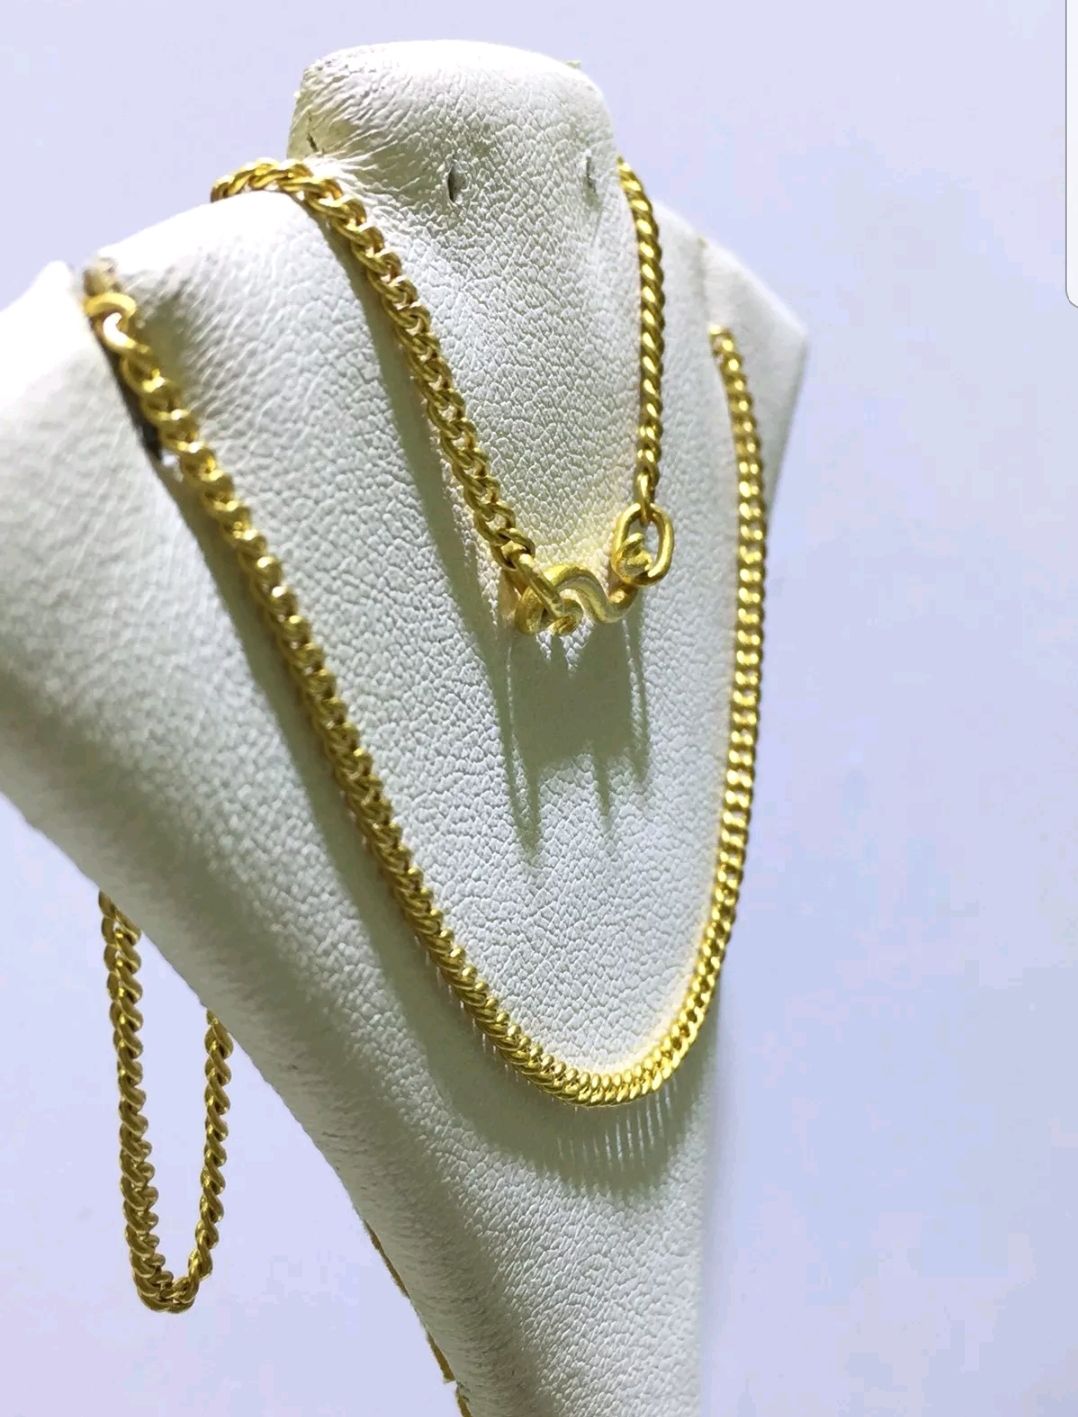 24k Solid Yellow Gold Flexible Thin Curb Chain Necklace